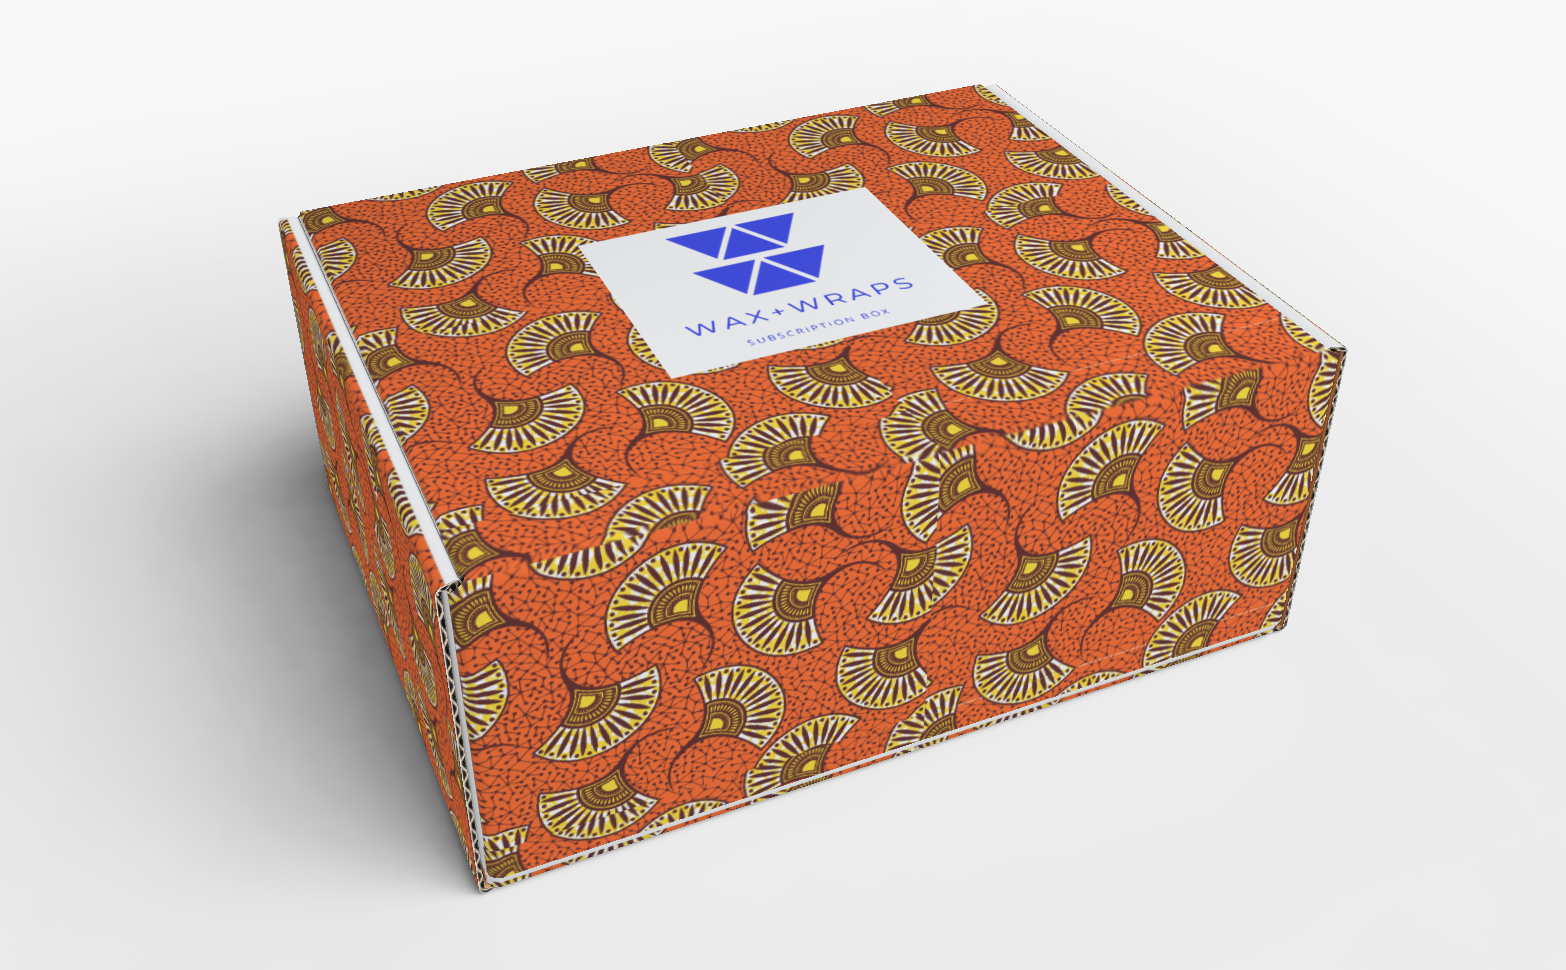 559-455-r257-wax-and-wraps-box.png